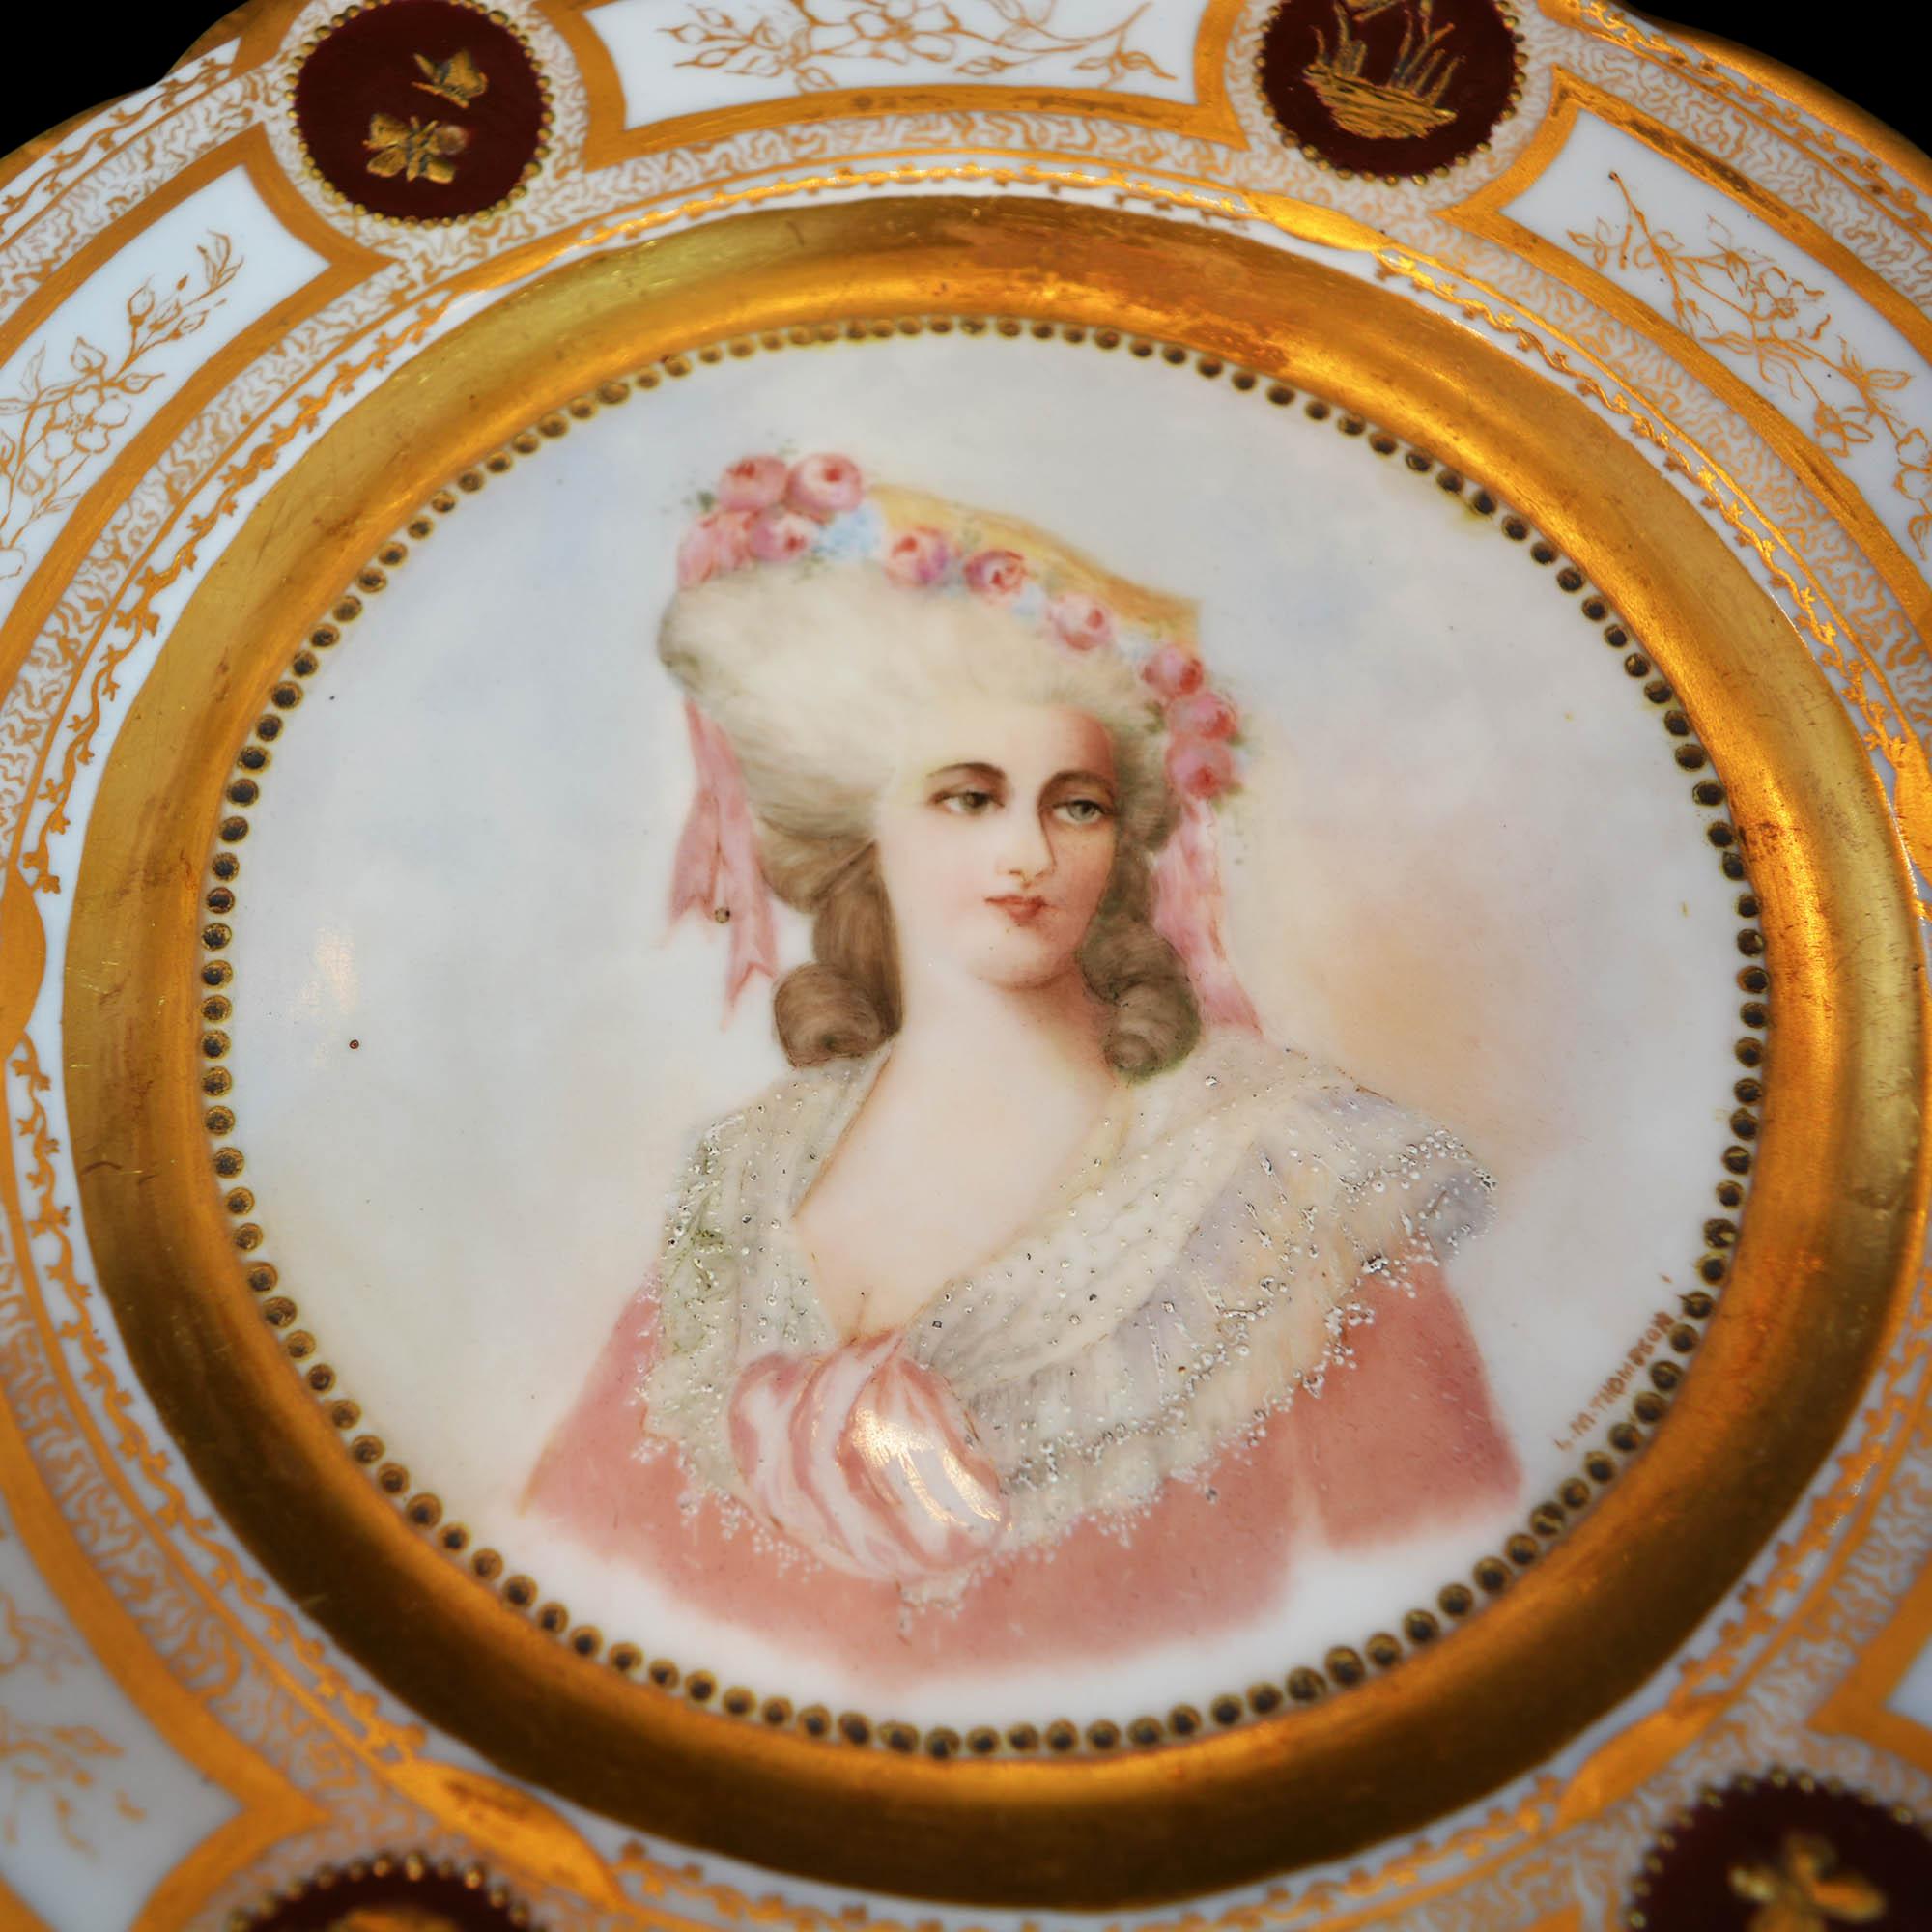 Antique French portrait plate signed by the artist. It features beautifully painted woman with floral adorned hat, rim with gilt scalloped edges and decorated with gilt garden motif, en verso stamped 